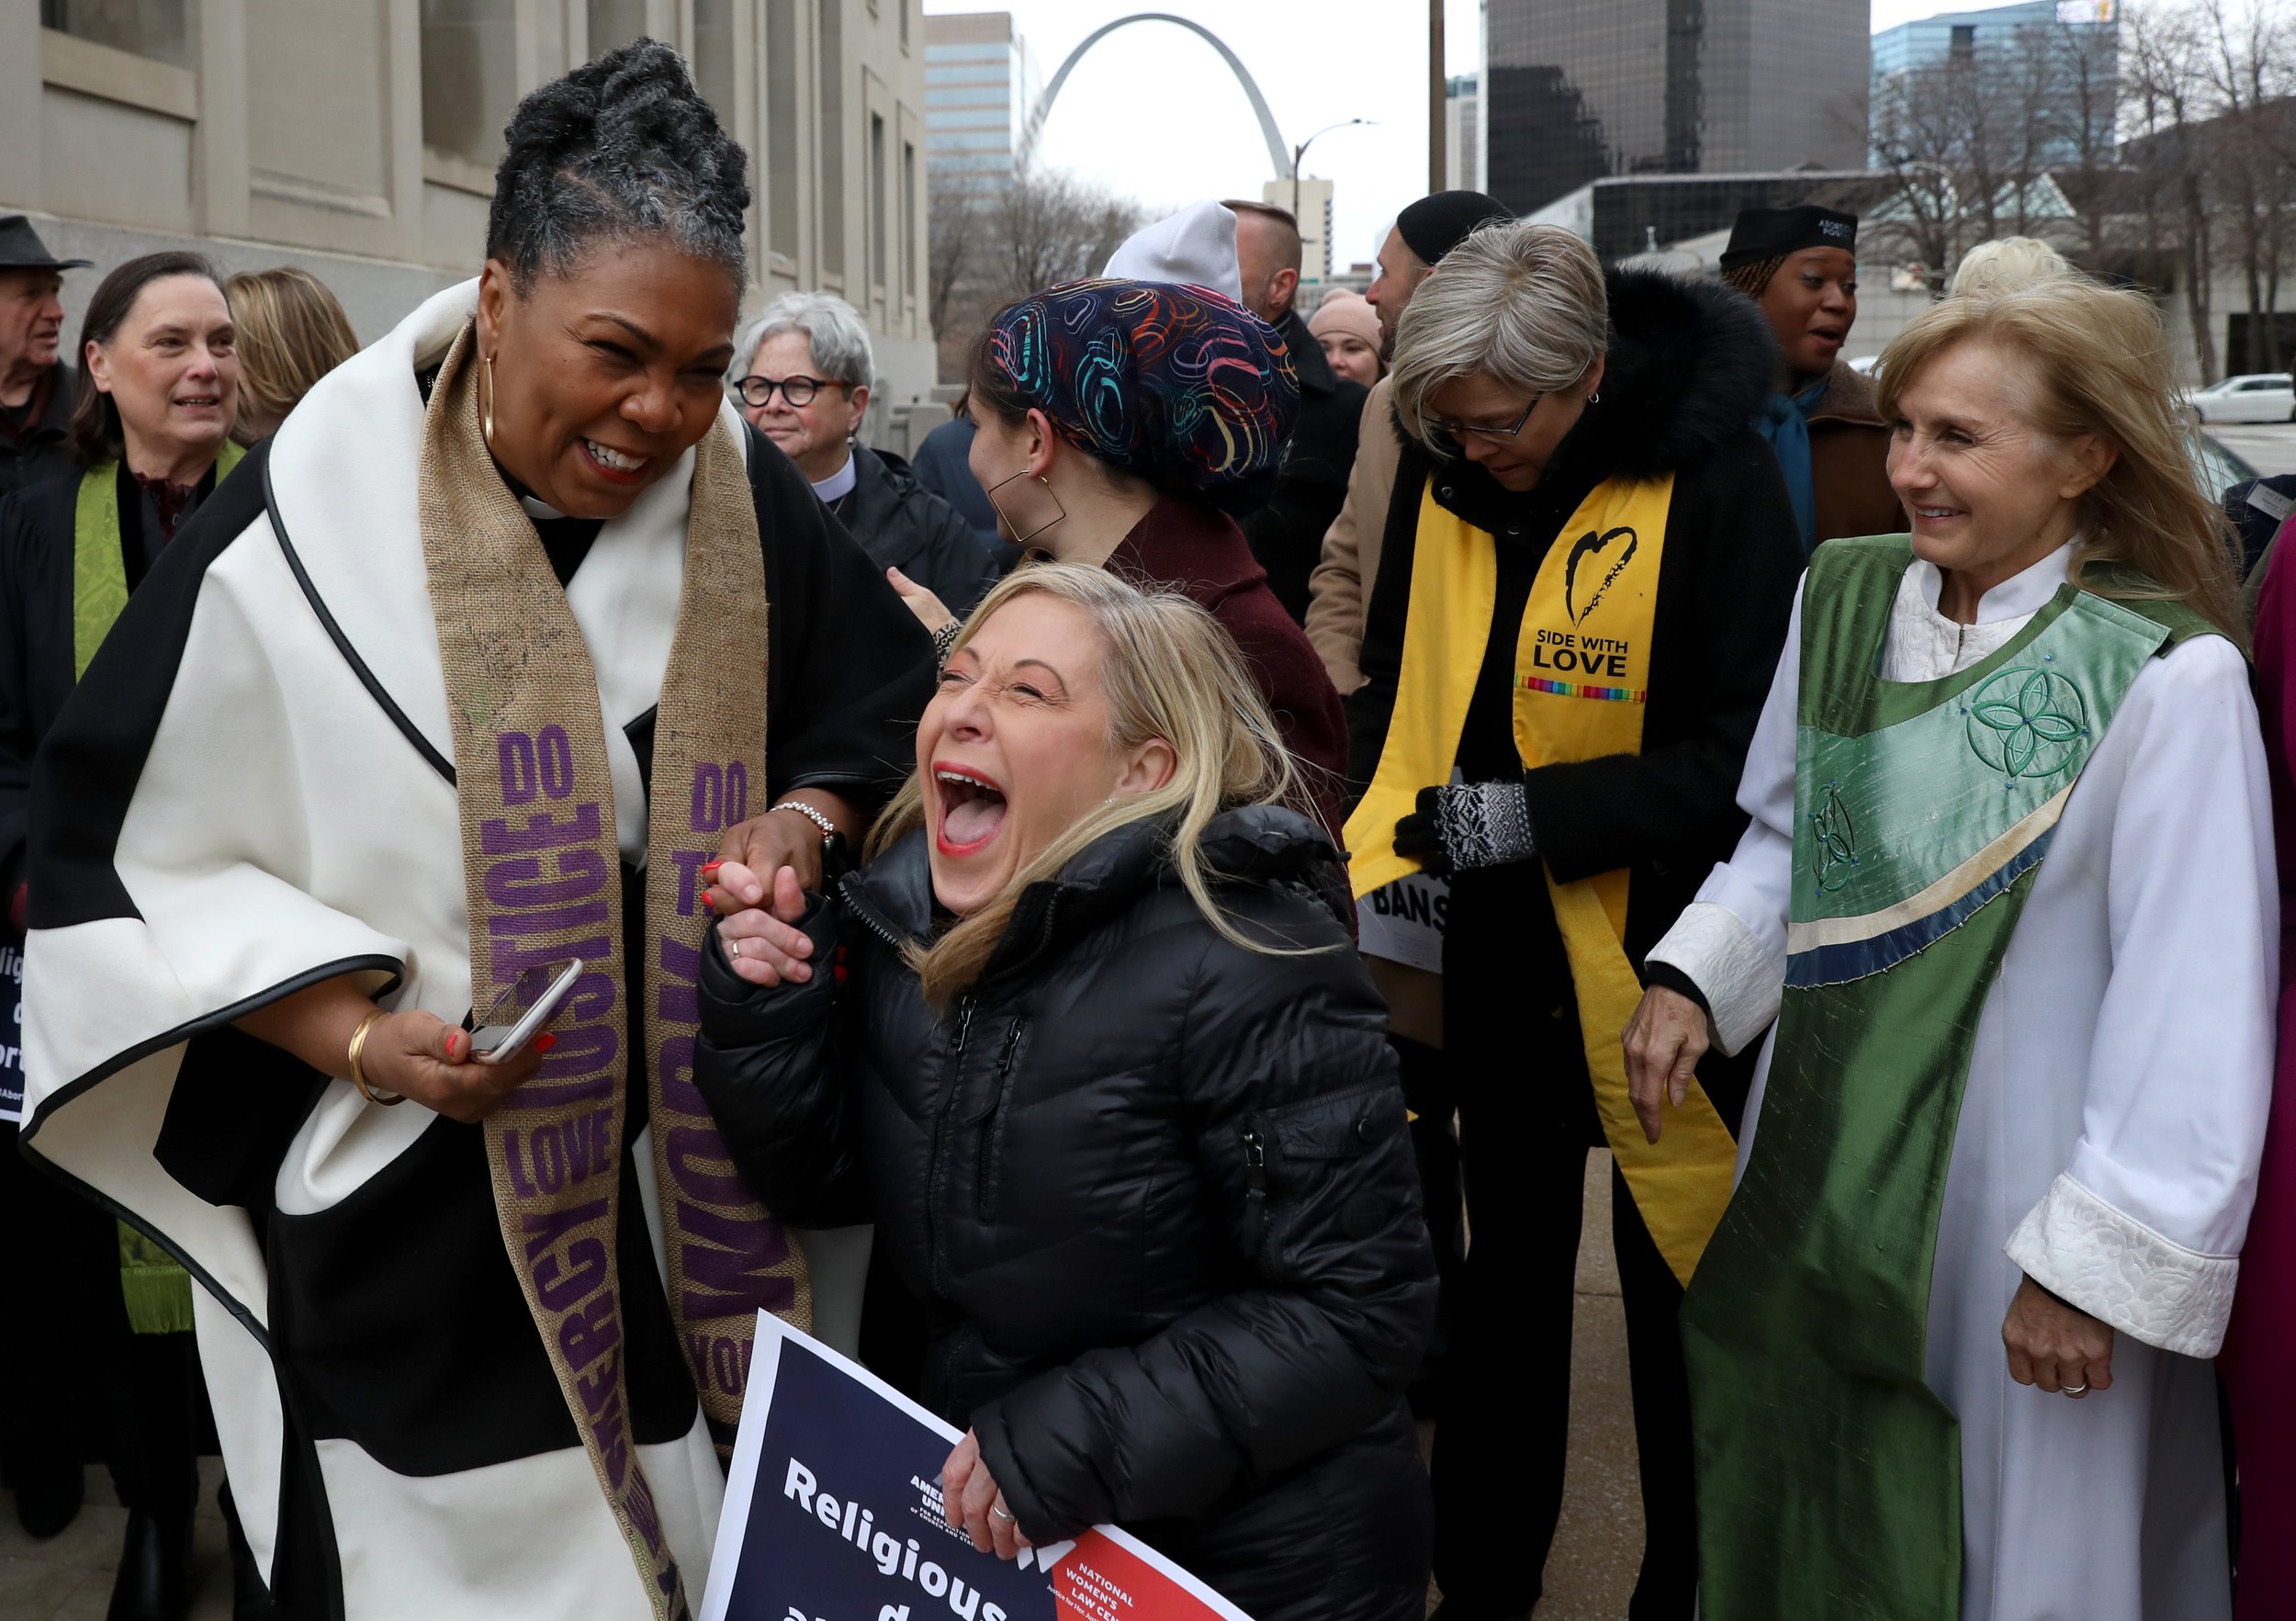  The Rev. Traci Blackmon of the United Church of Christ, left, laughs with attorney Denise Lieberman, right, after the group walks to the Civil Courts building following a press conference announcing a lawsuit challenging Missouri's abortion ban on T